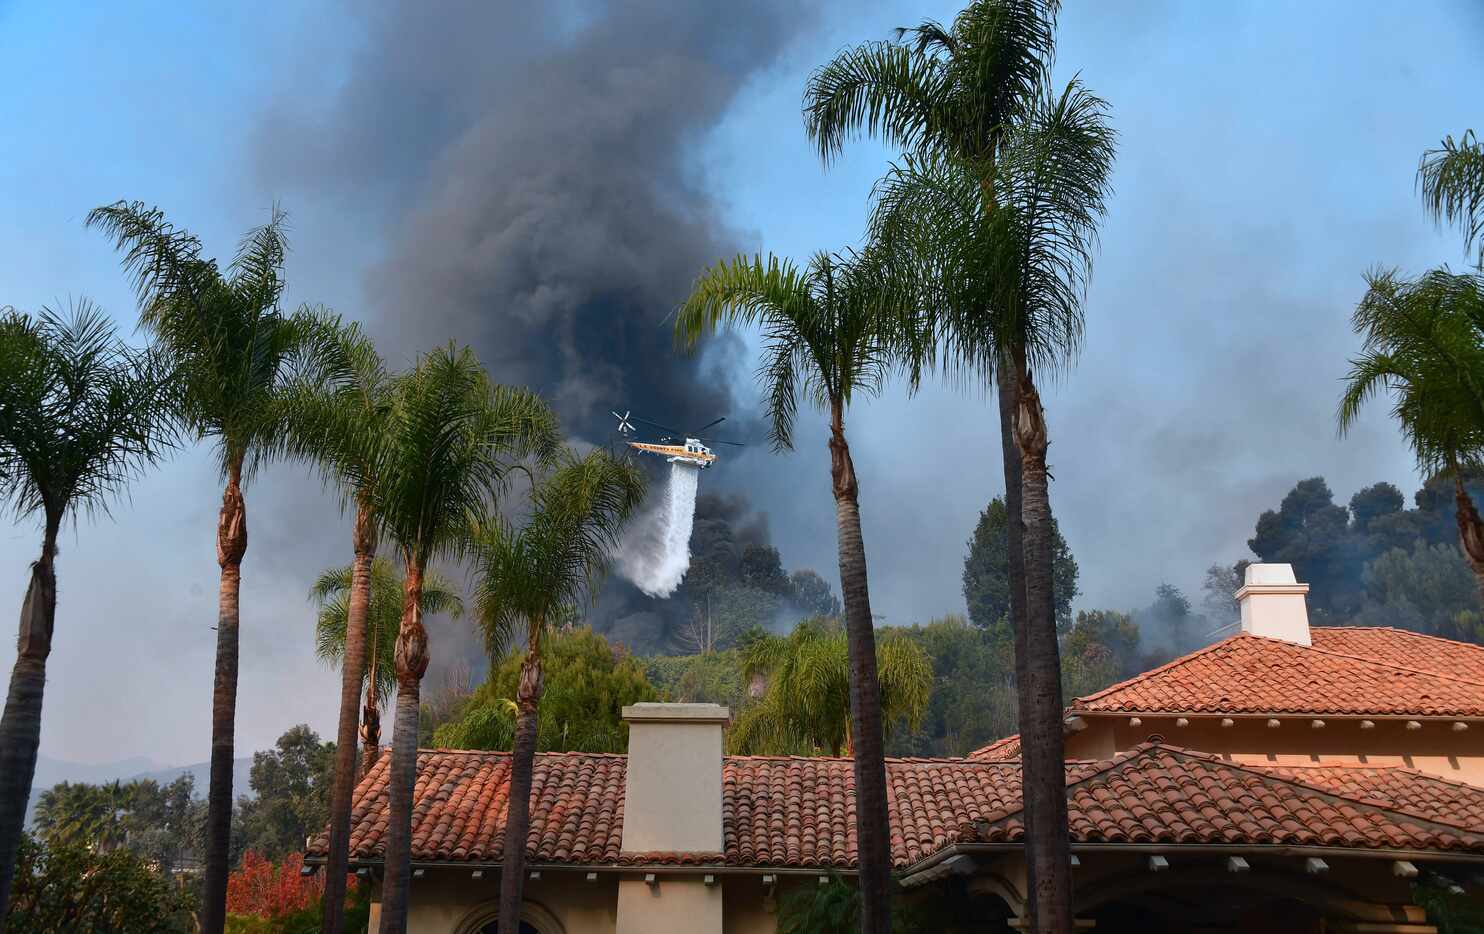 A helicopter drops water over burning homes in Bel Air as a huge plume of black smoke rises...